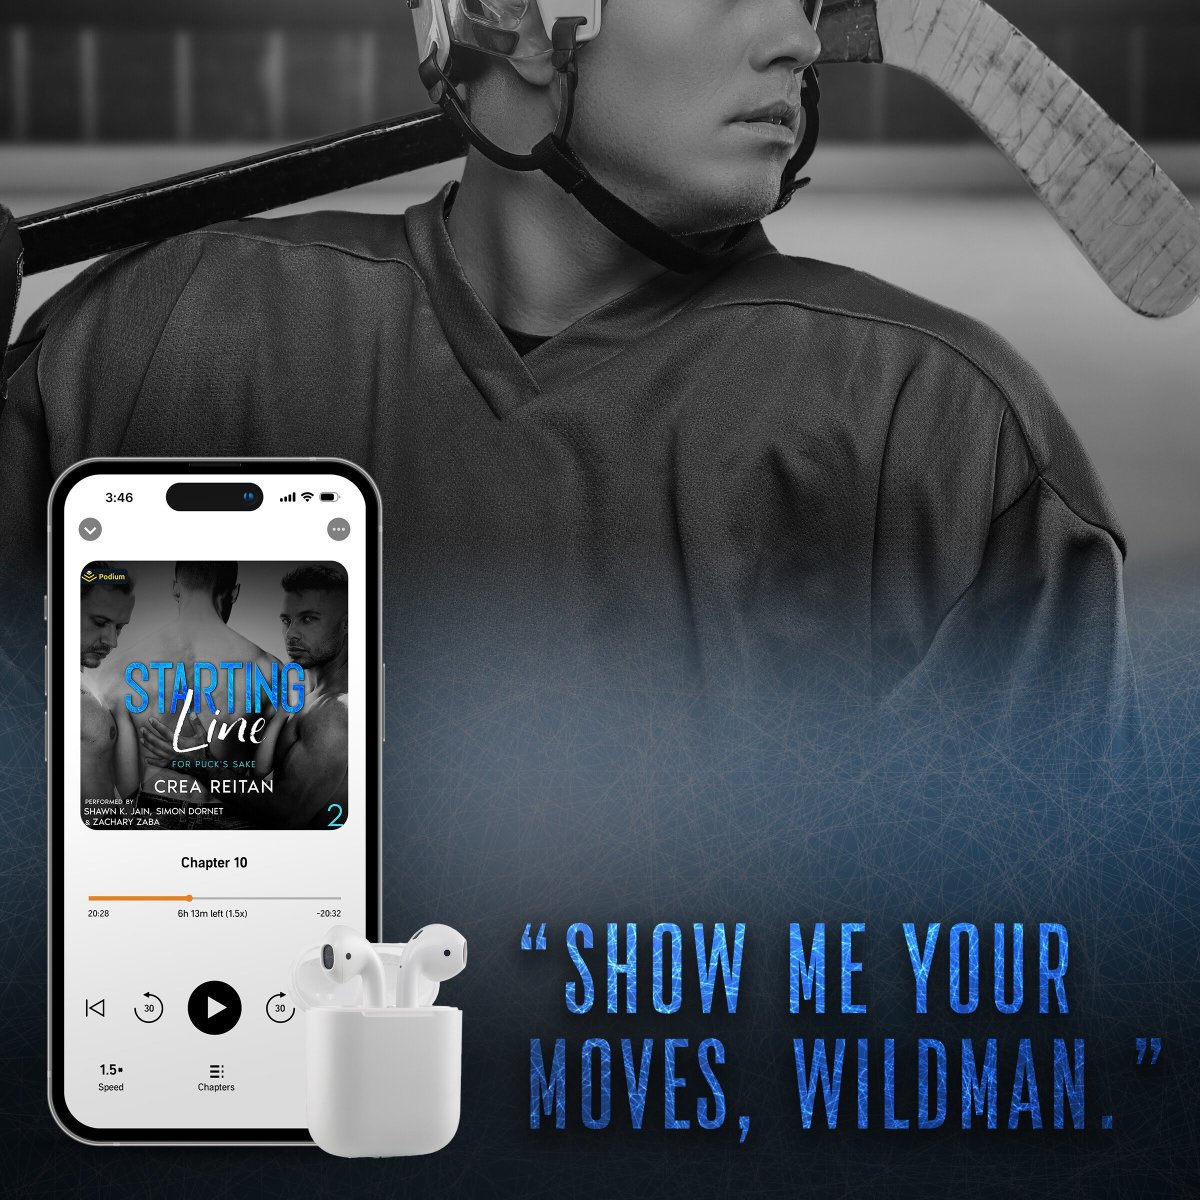 It's #TeaserTime for the audio release of Starting Line by Crea Reitan!

#Preorder: geni.us/staevents

#HockeyRomance #MMMRomance #SecretRelationship #Sweet @Chaotic_Creativ